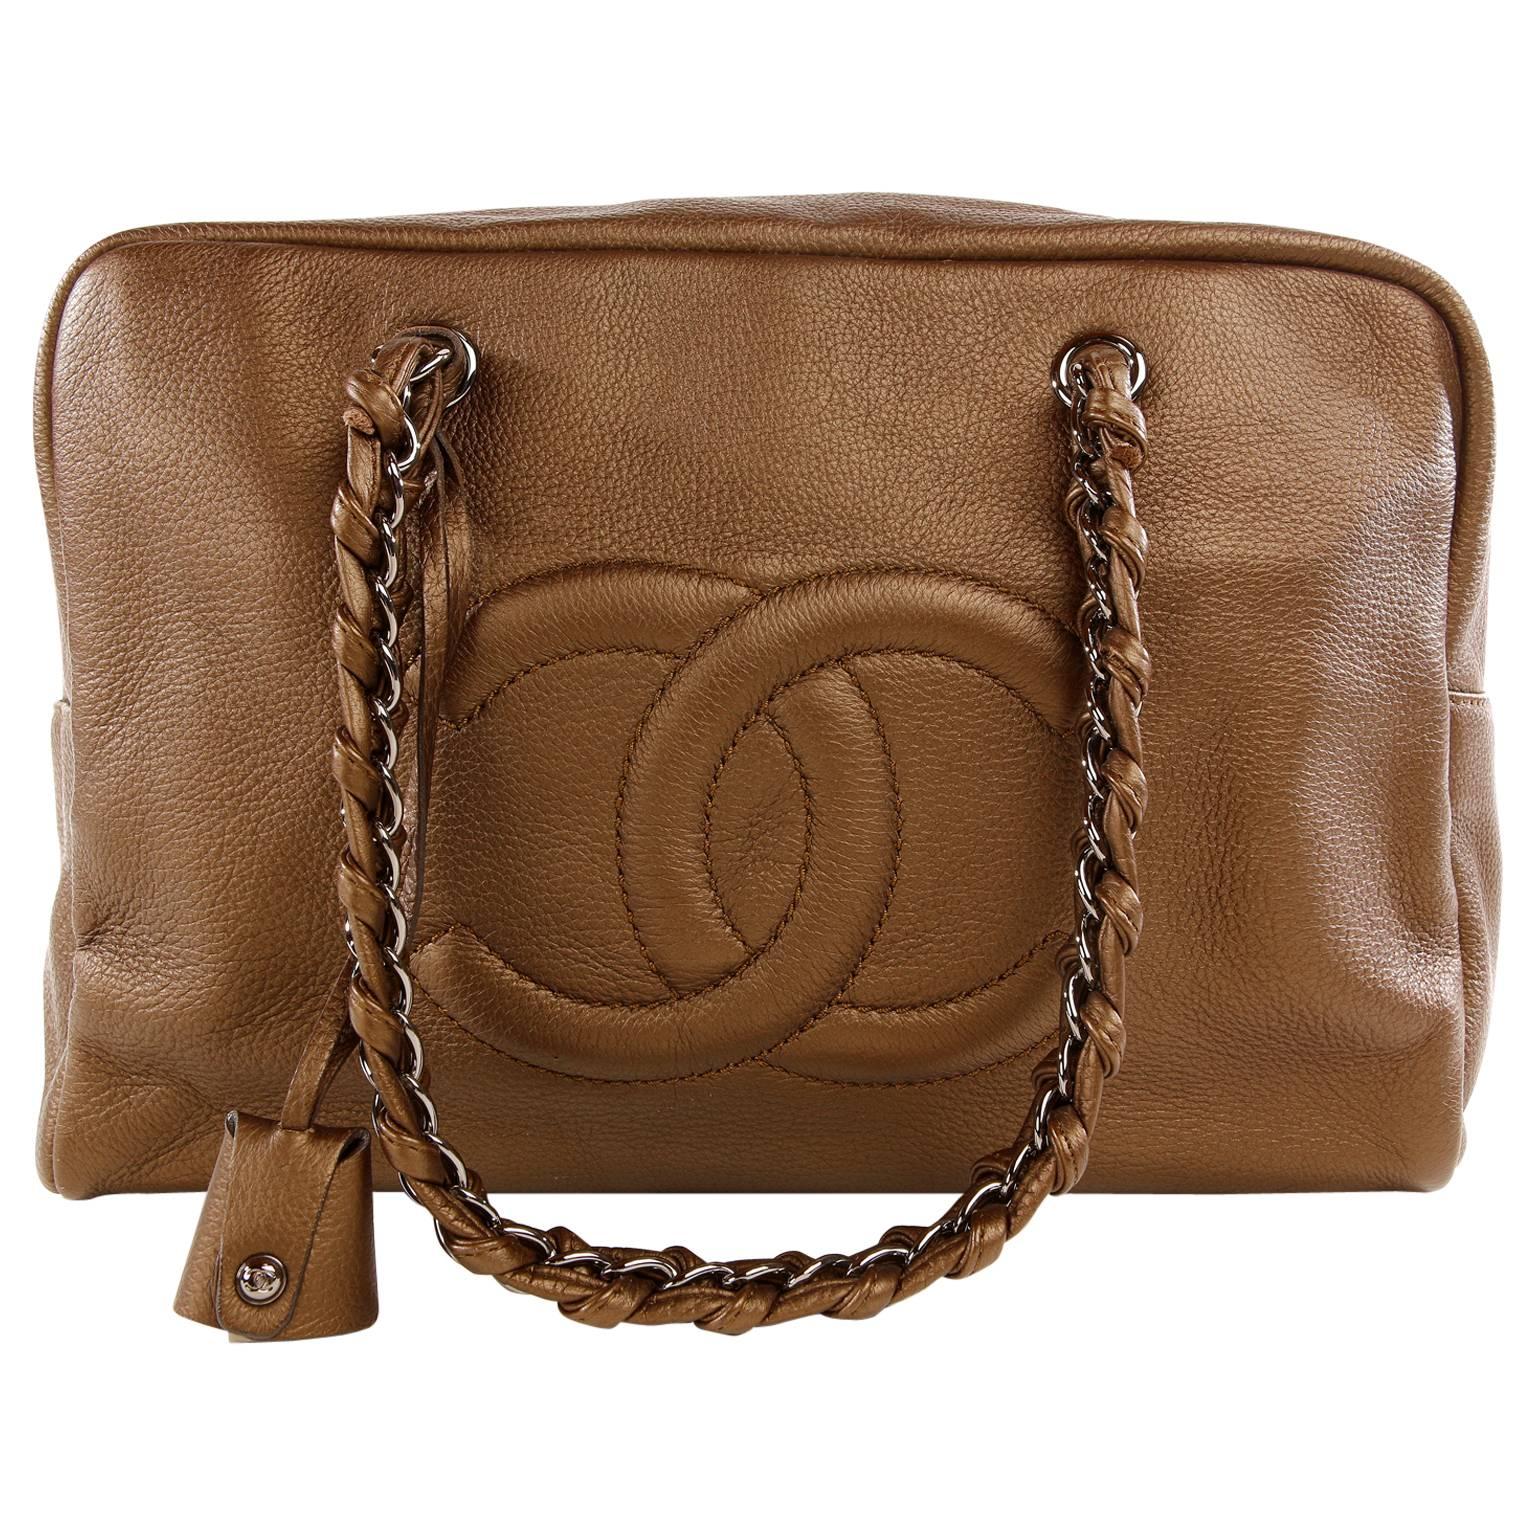 Chanel Bronze Leather Large Bowler Tote Bag For Sale